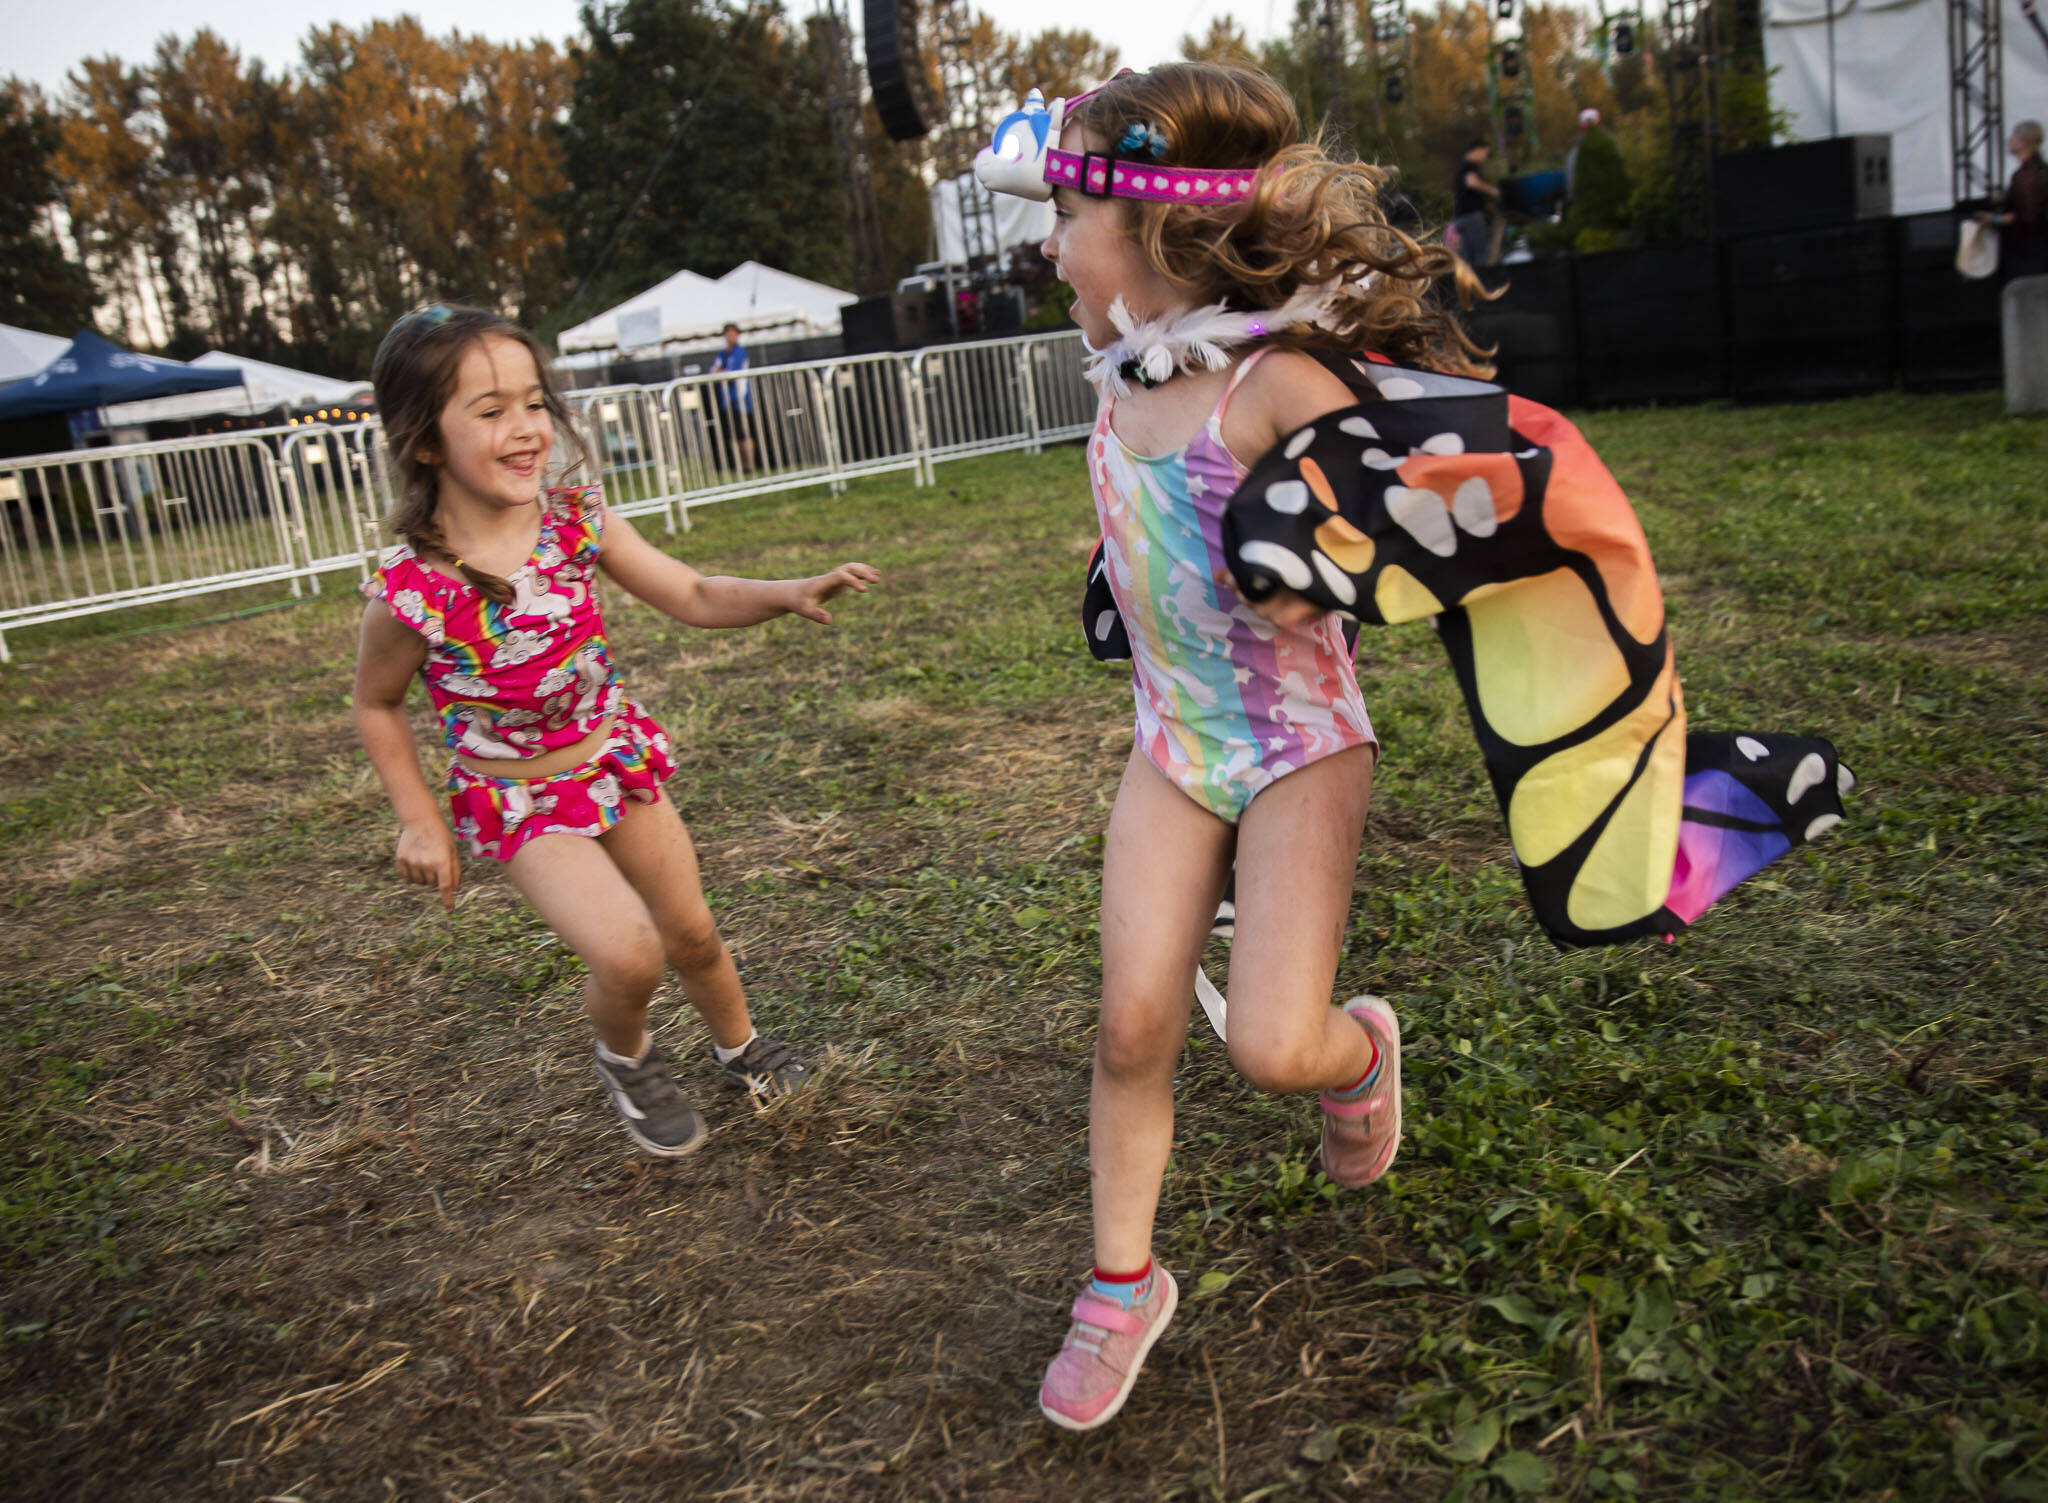 Coral Roussell, 4, left, chases Penelope Witter, 5, around the grass in front of the Garden Stage on Thursday, in Snohomish. (Olivia Vanni / The Herald)